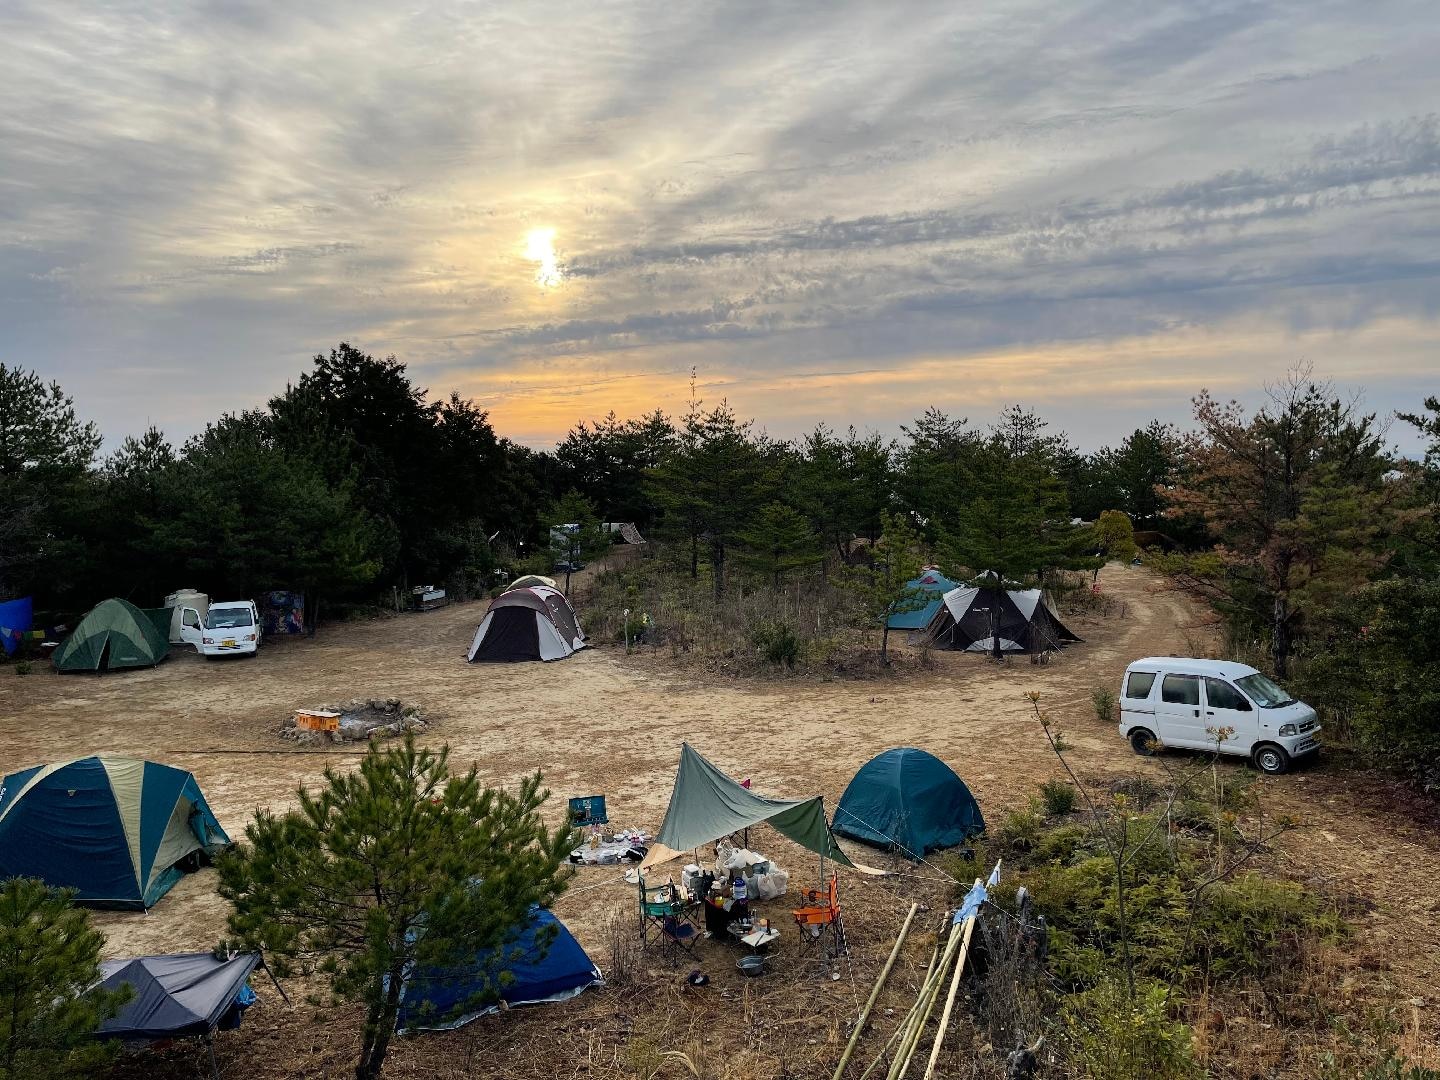 ・[Auto Camping] Enjoy a relaxing time while watching the changing sky